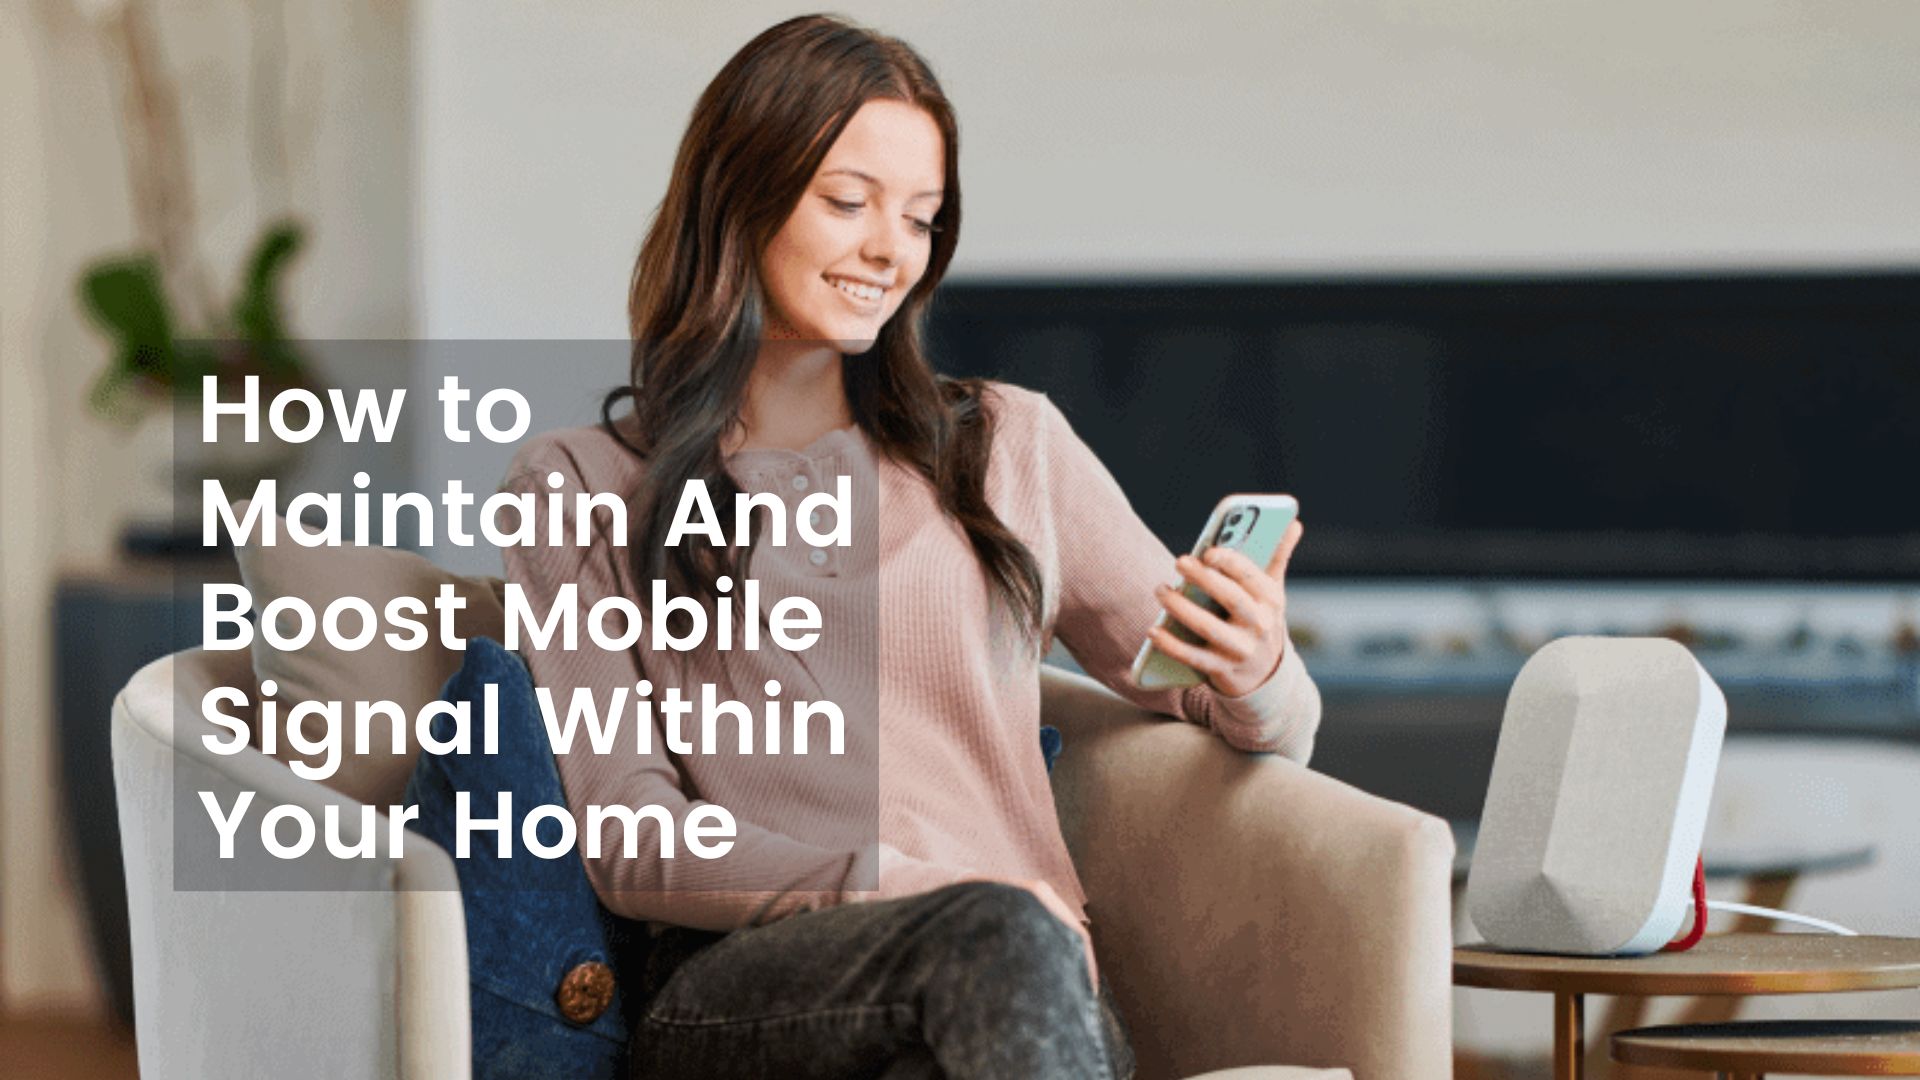 How to Maintain And Boost Mobile Signal Within Your Home